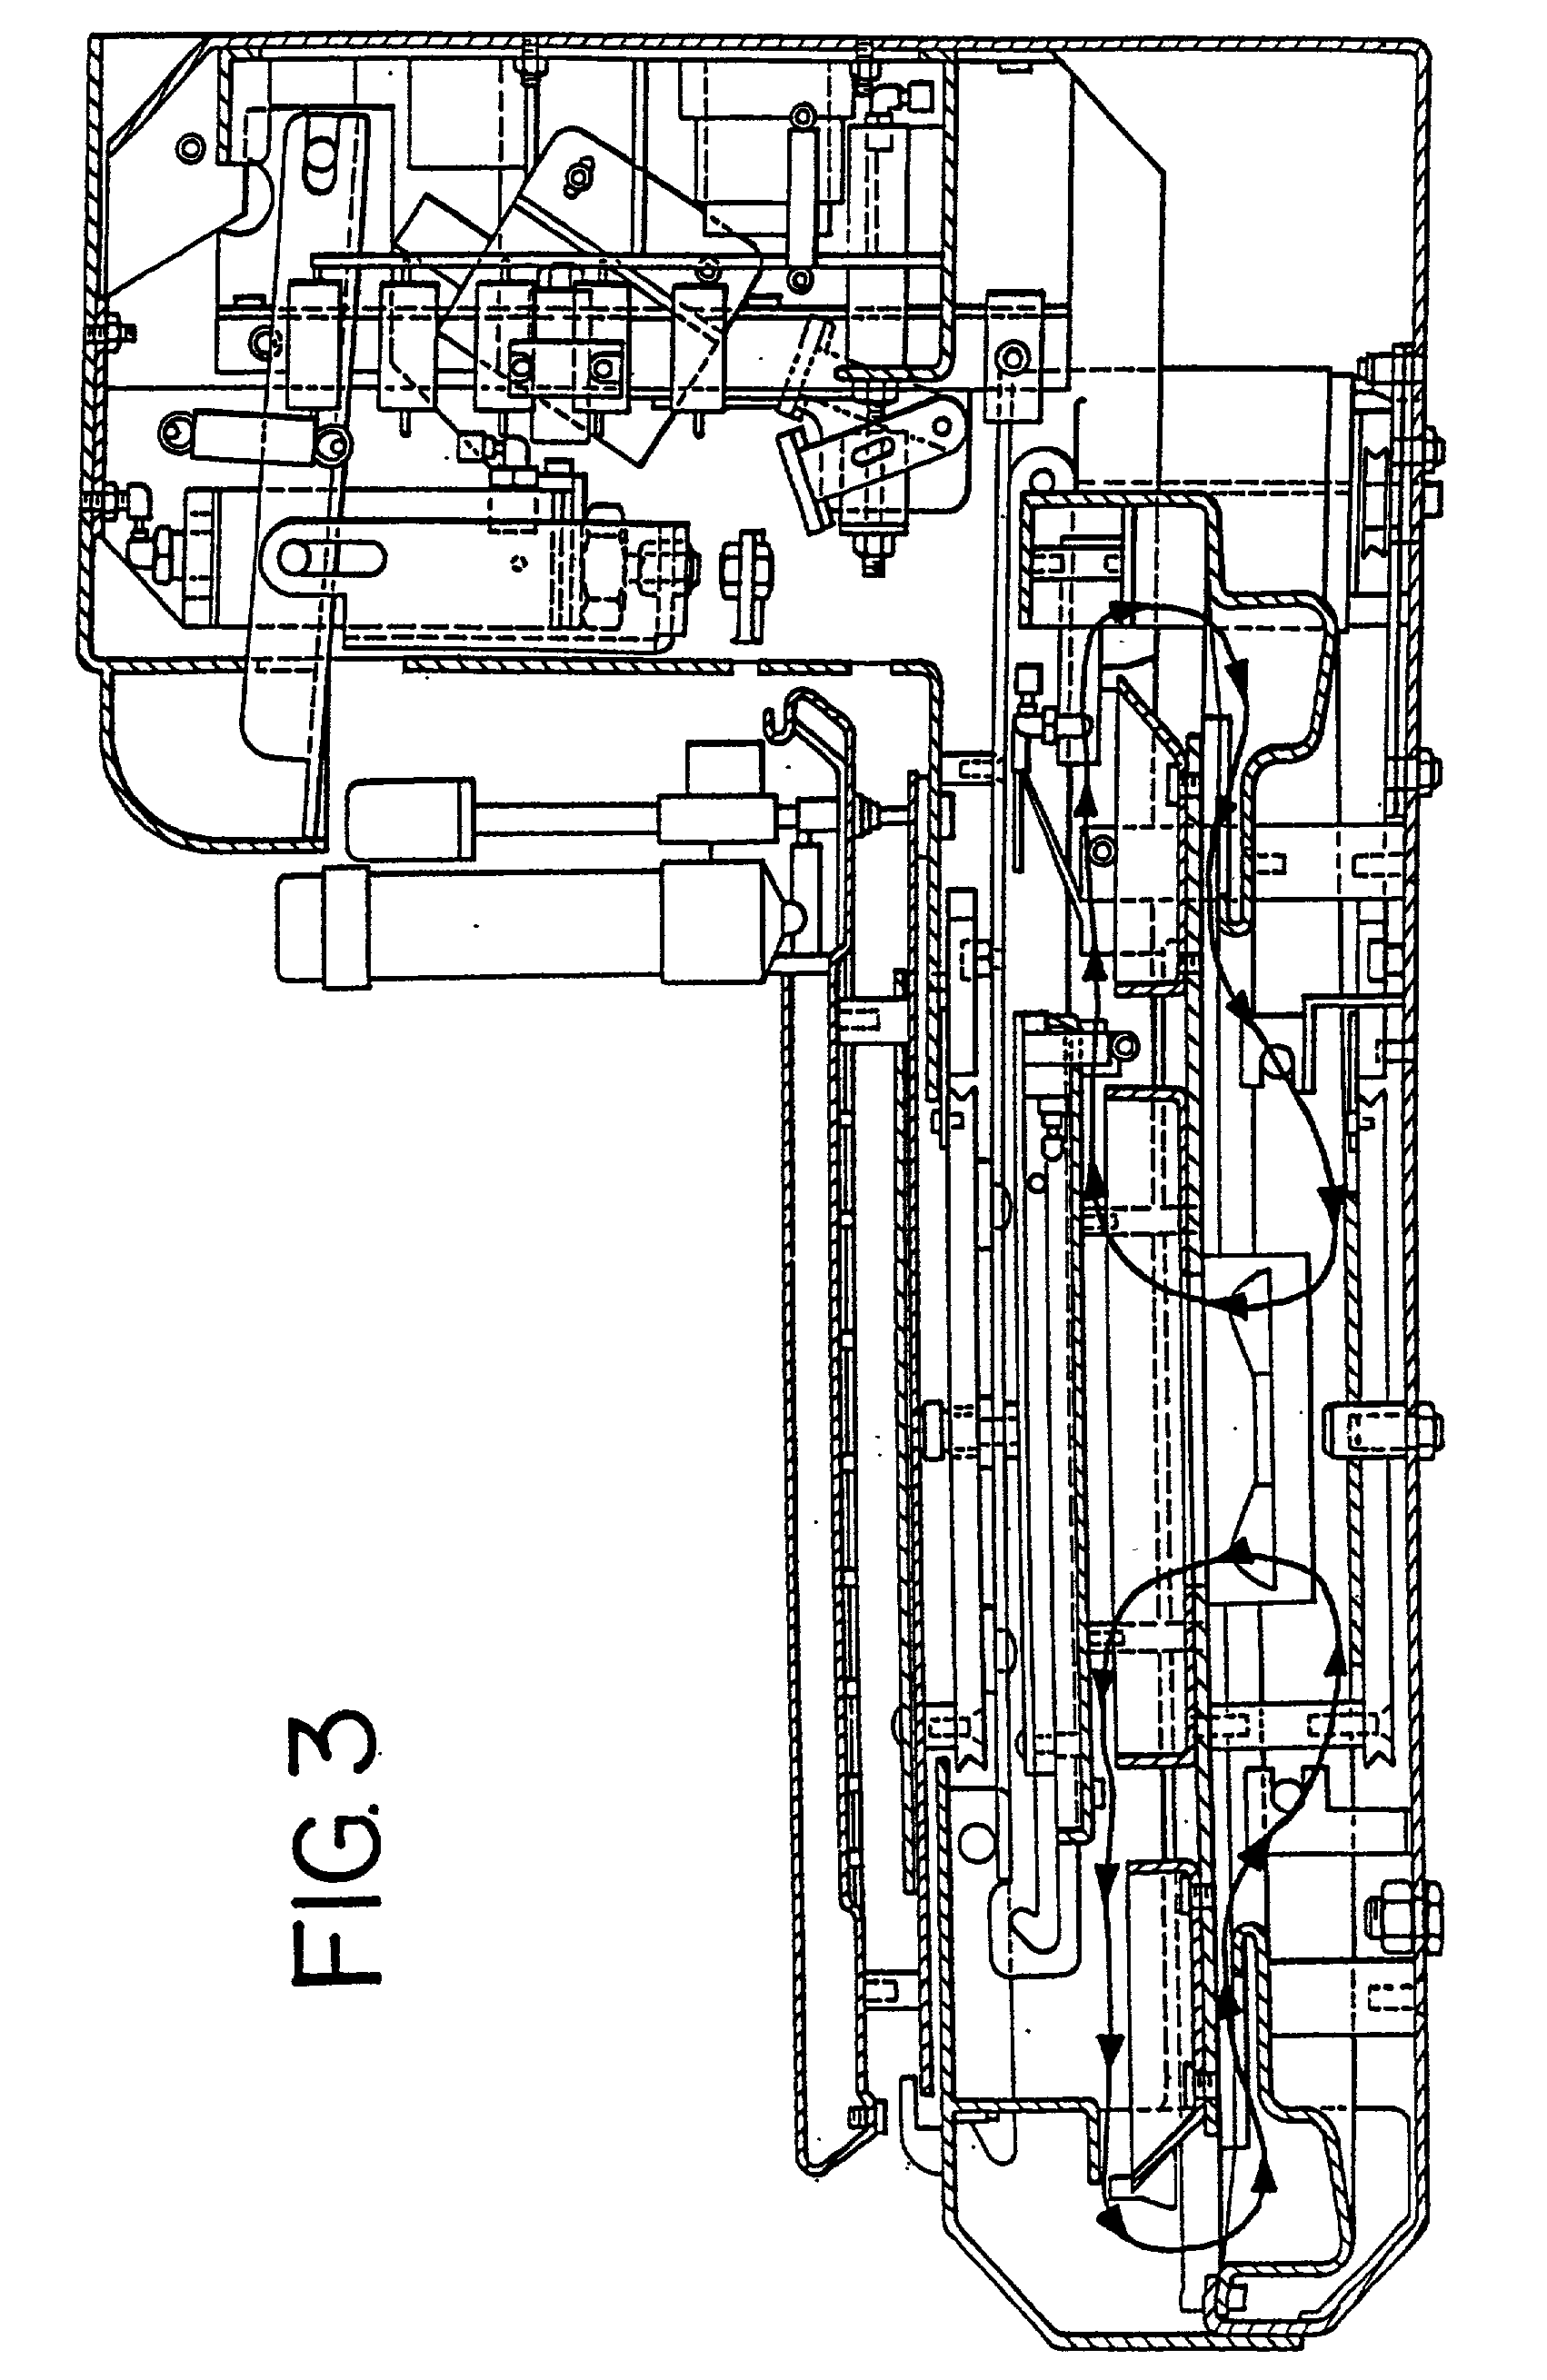 Method and apparatus for modifying pressure within a fluid dispenser